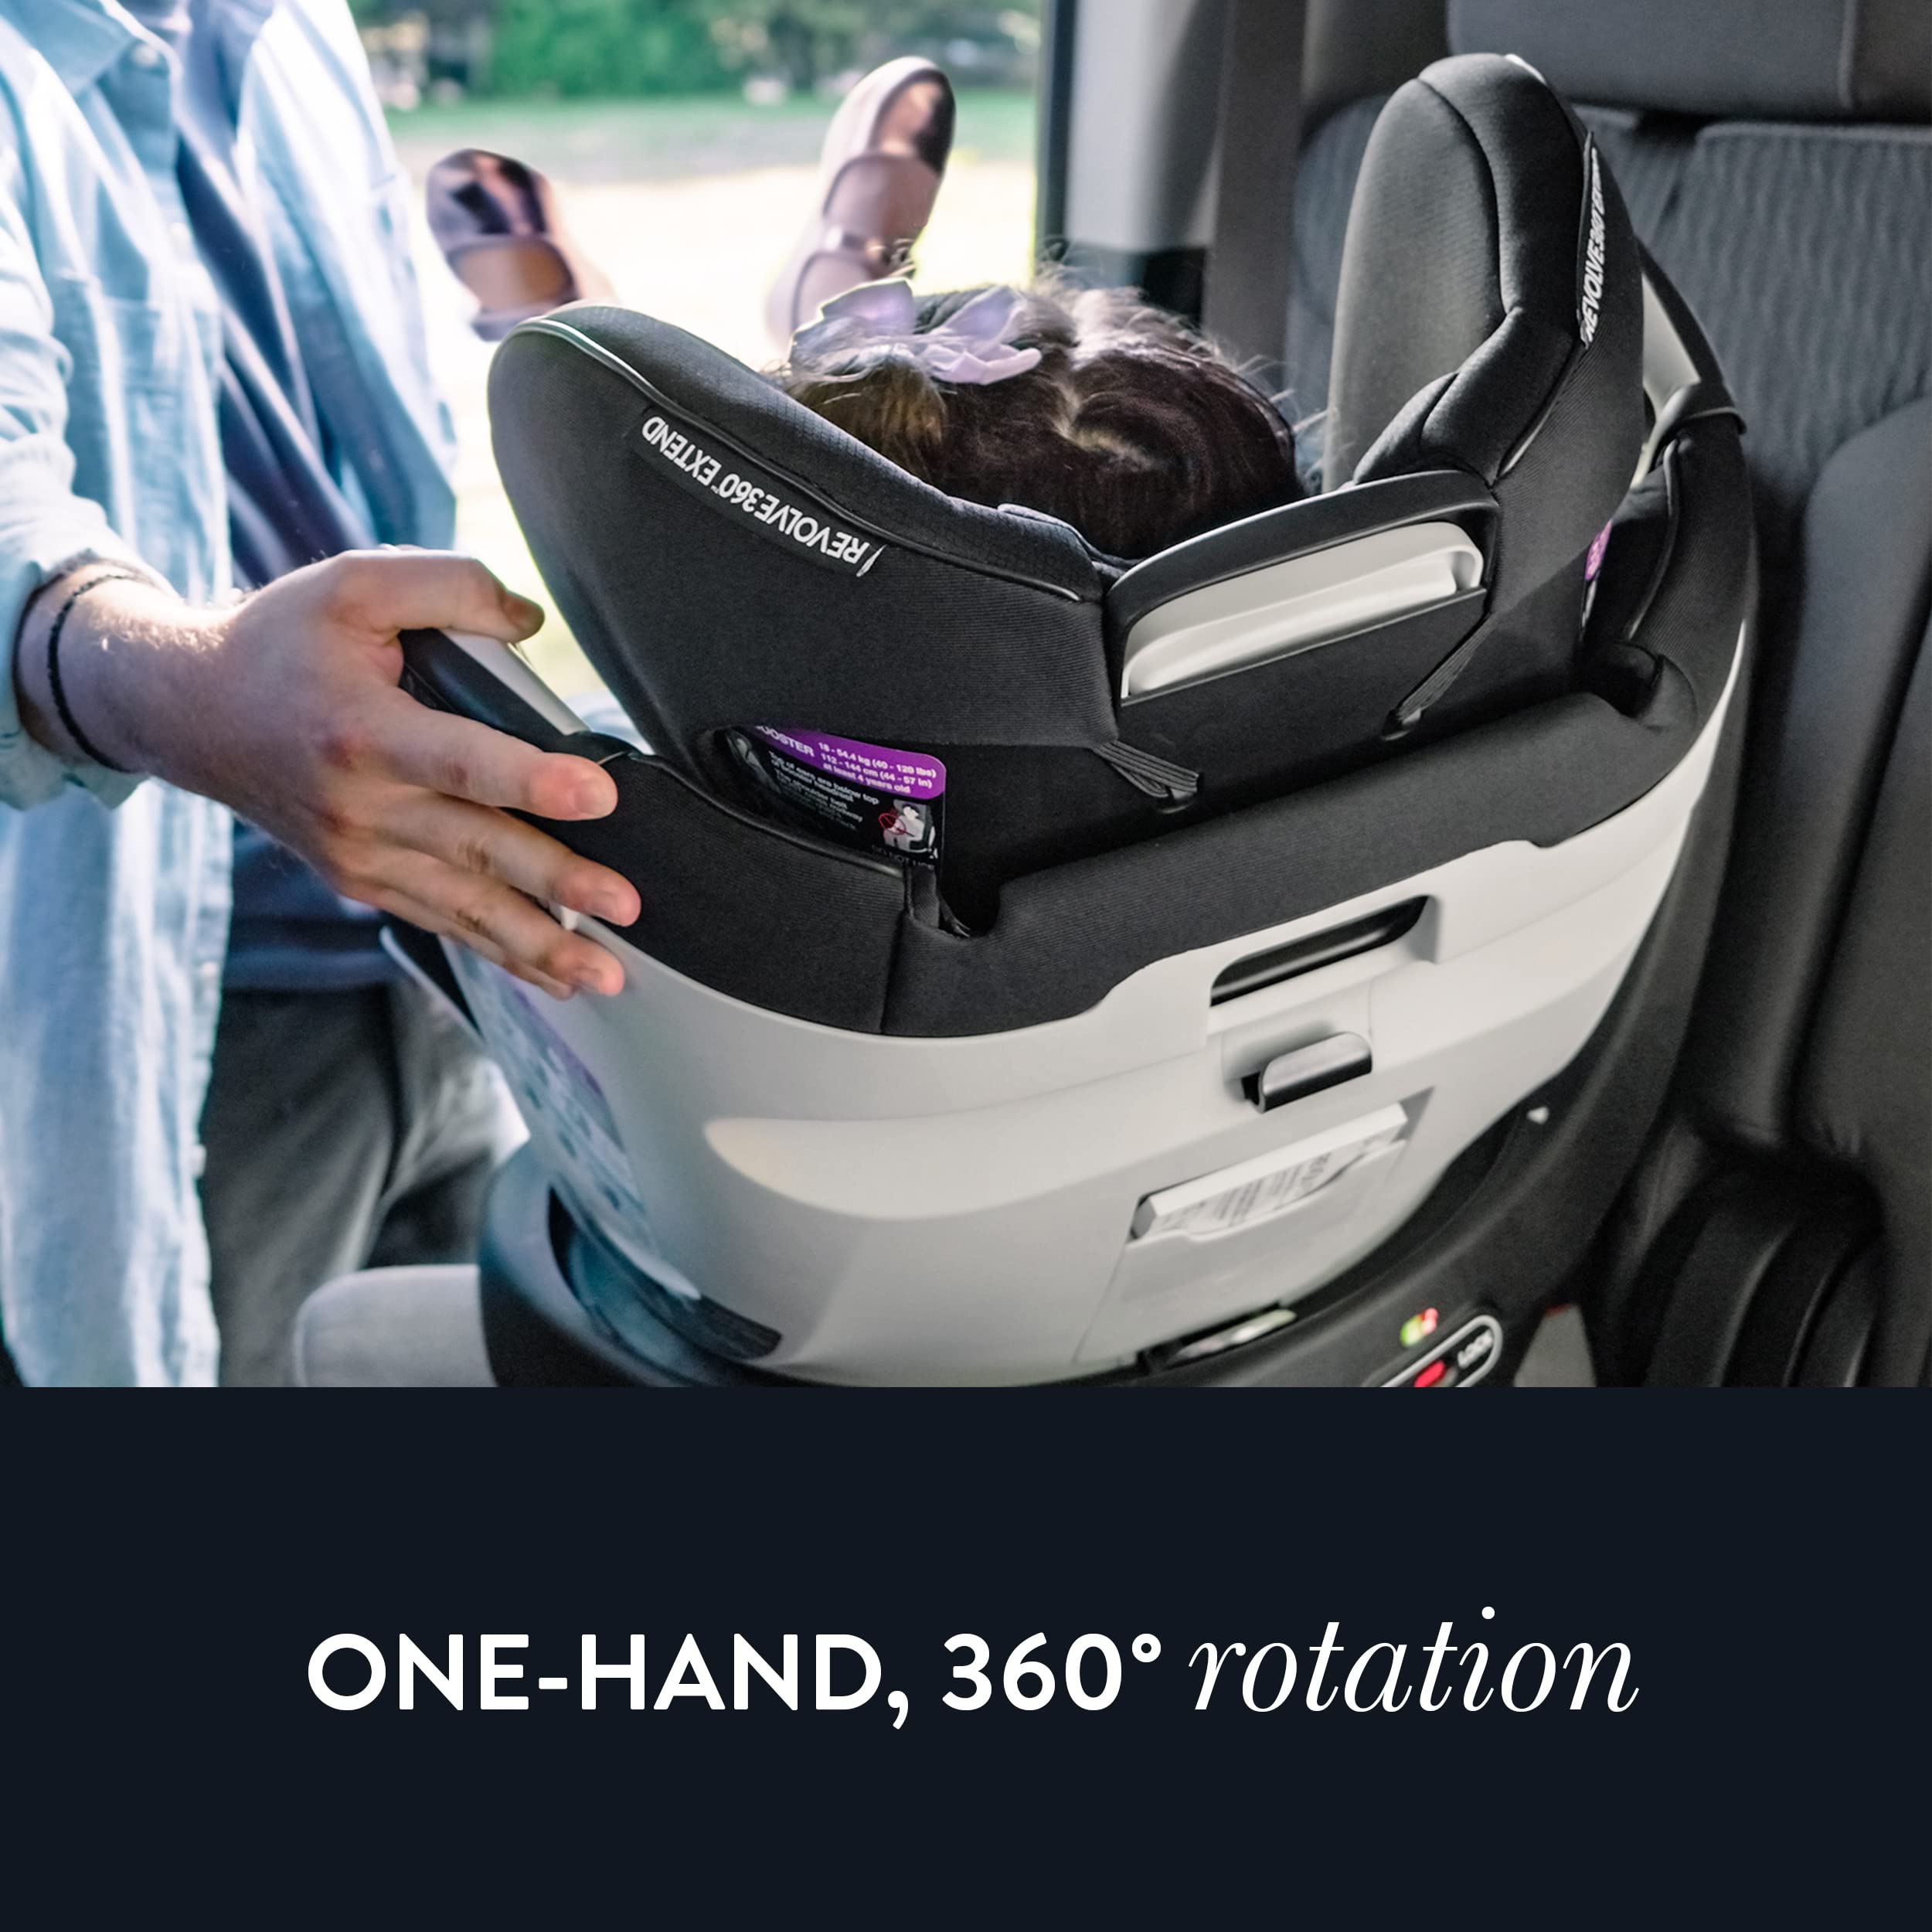 Evenflo Gold Revolve360 Extend All-in-One Rotational Car Seat with SensorSafe (Sapphire Blue)